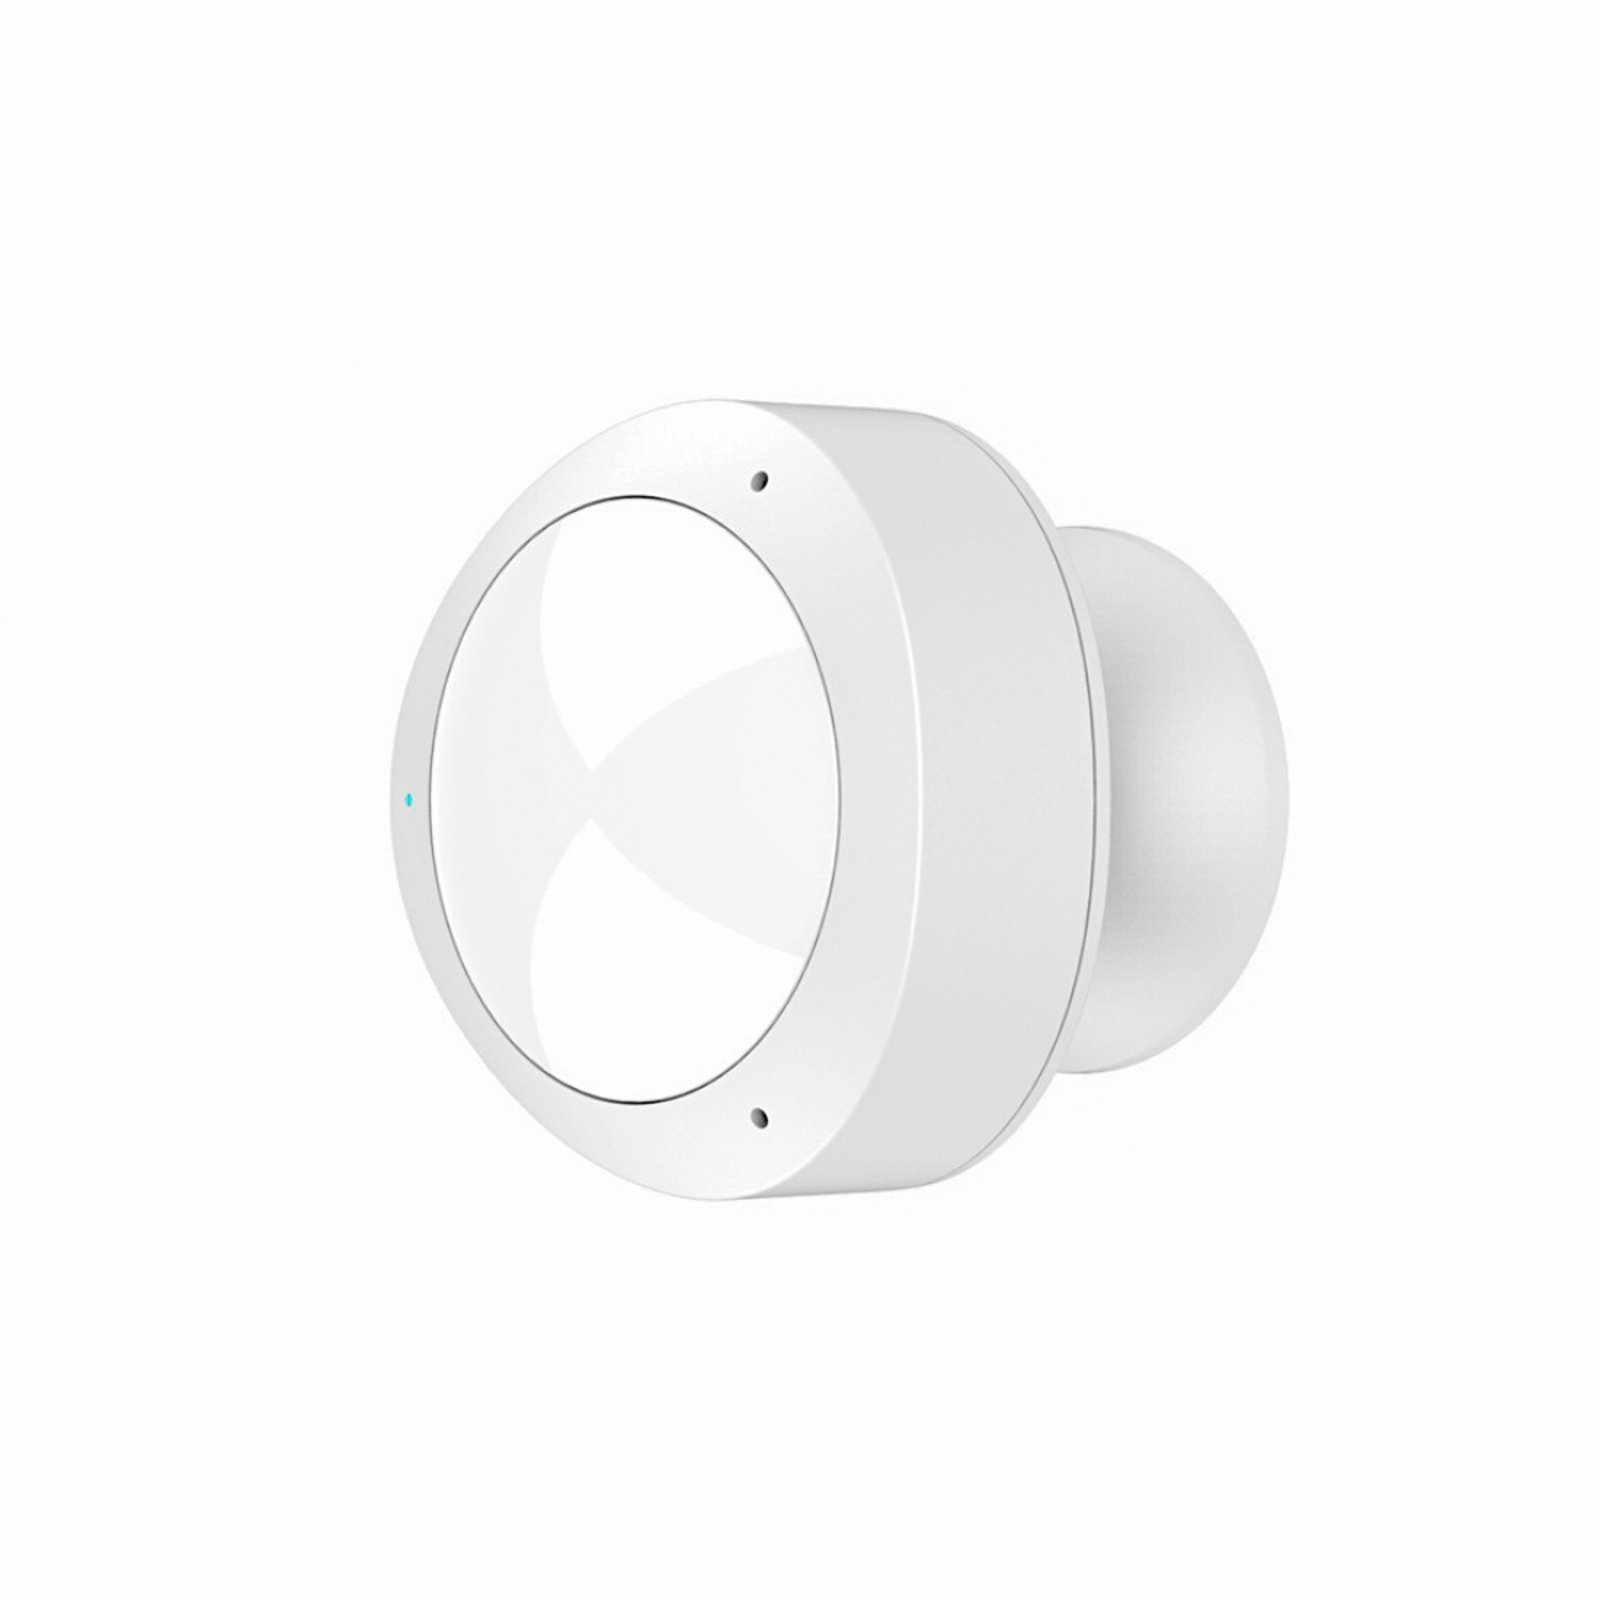 Hama WiFi motion detector app and voice control